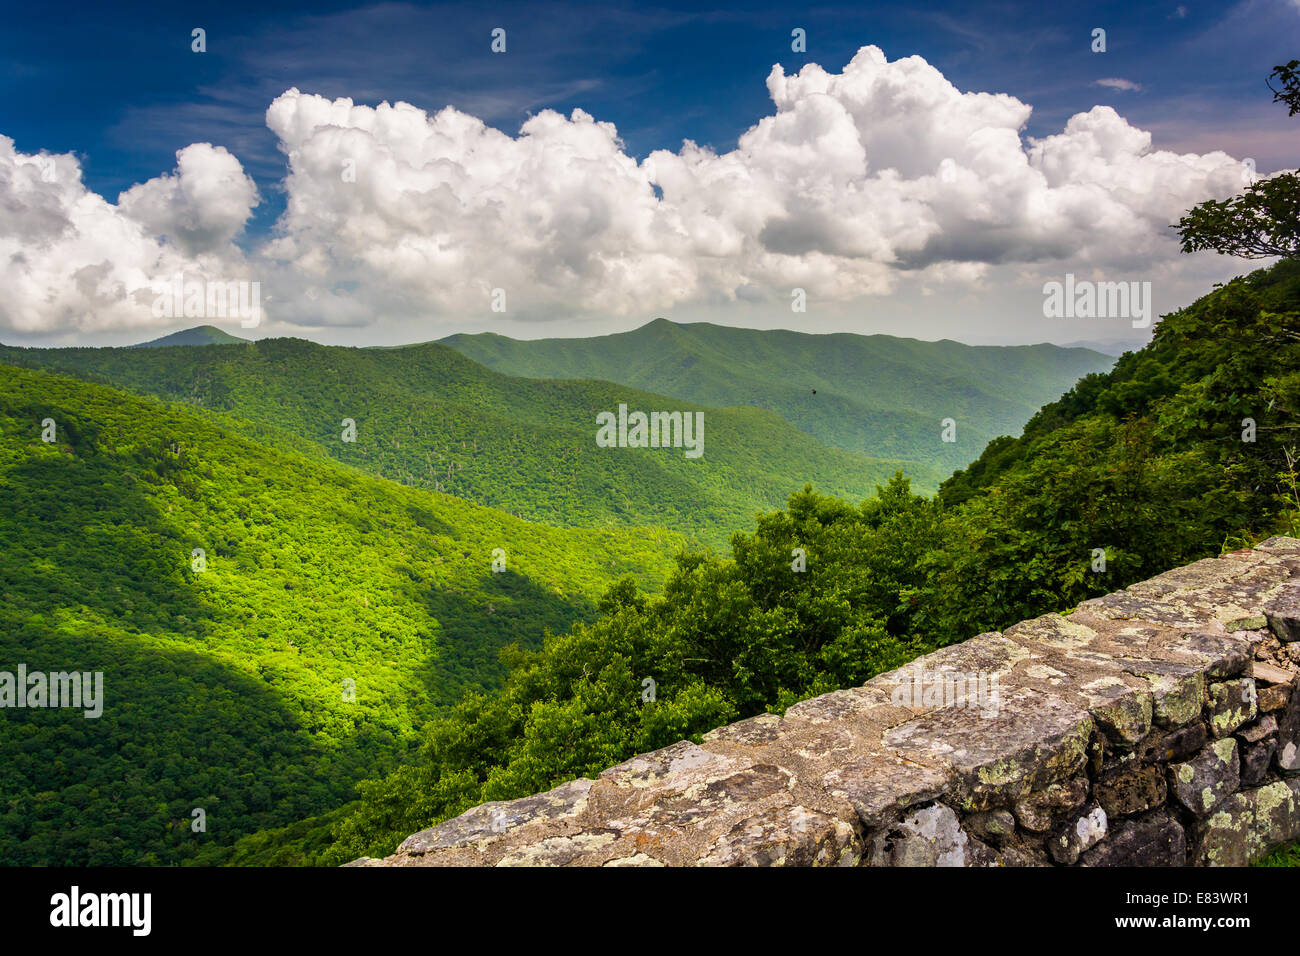 View of the Appalachian Mountains from the Blue Ridge Parkway, North Carolina. Stock Photo